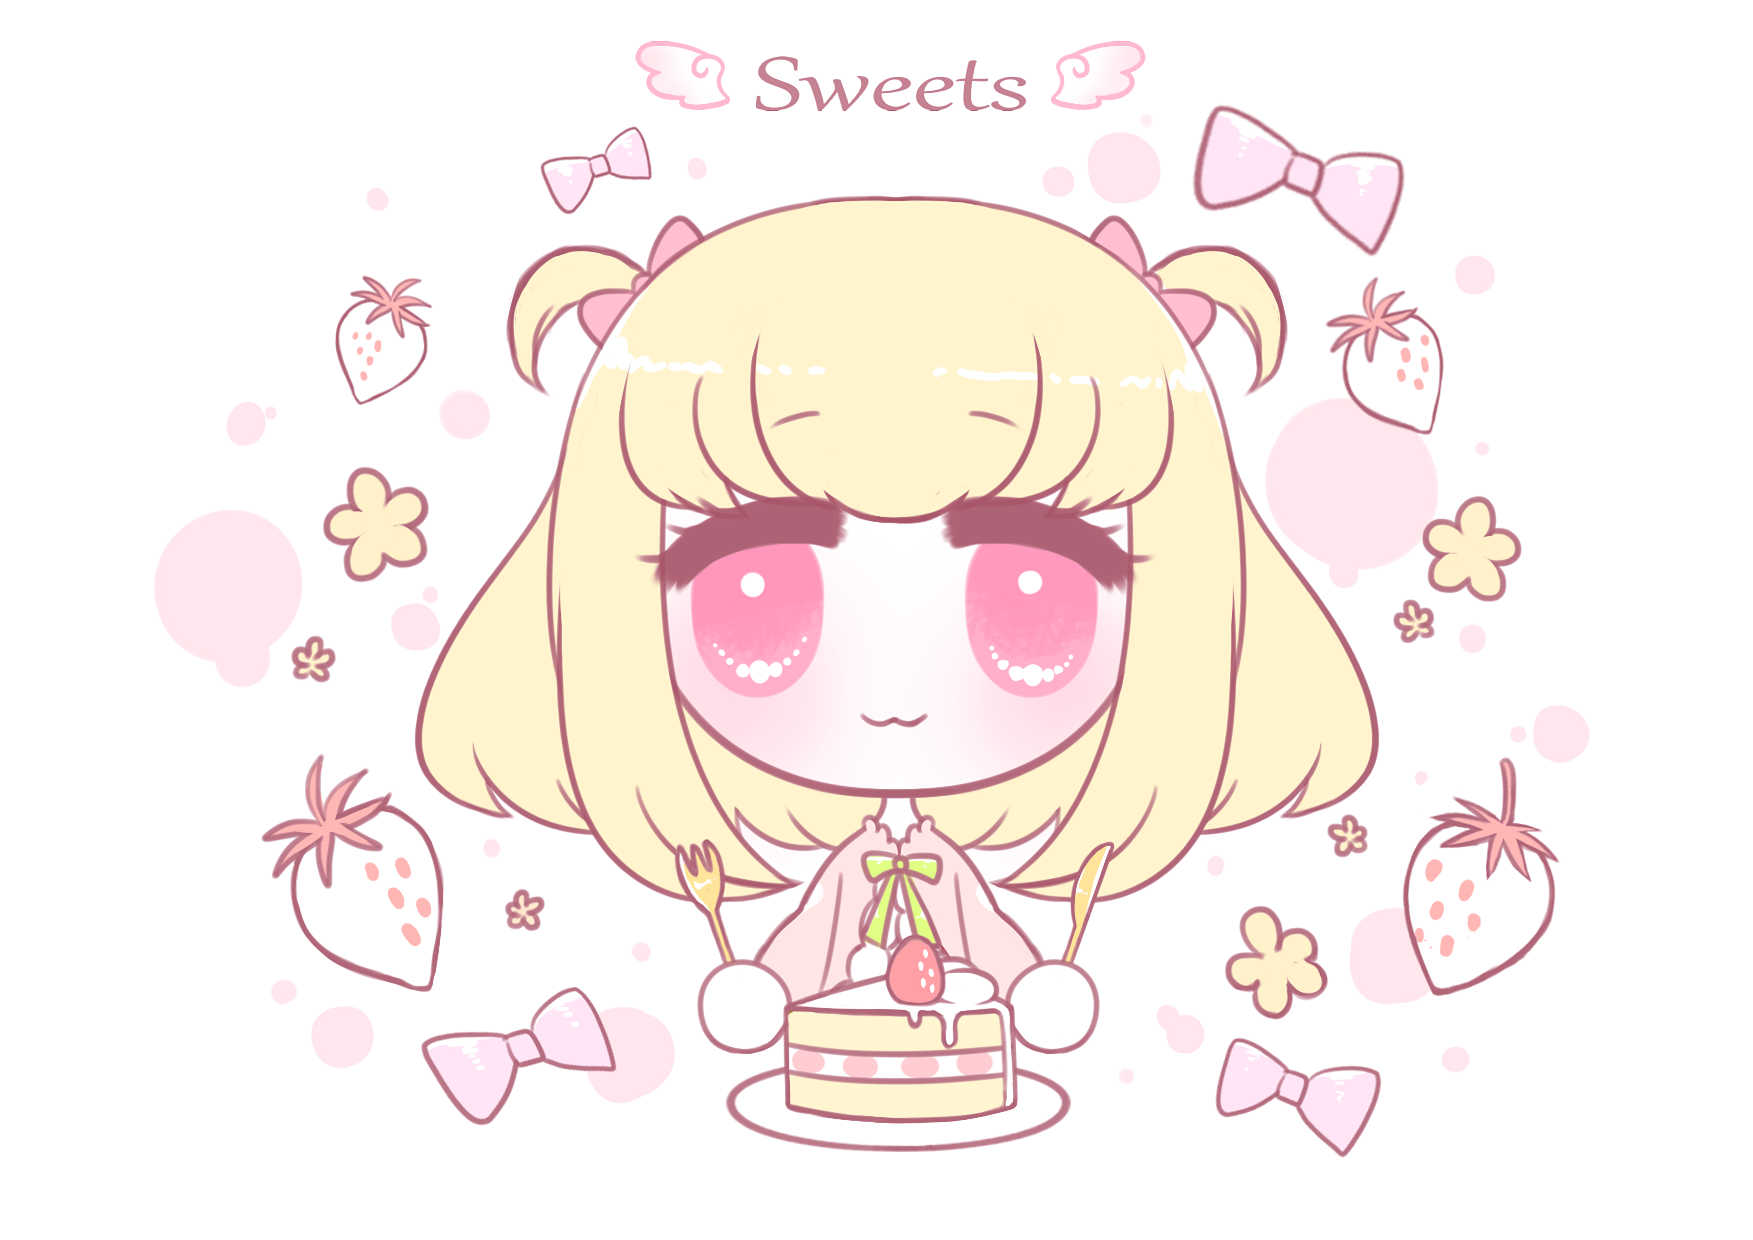 ♥Sweets♥